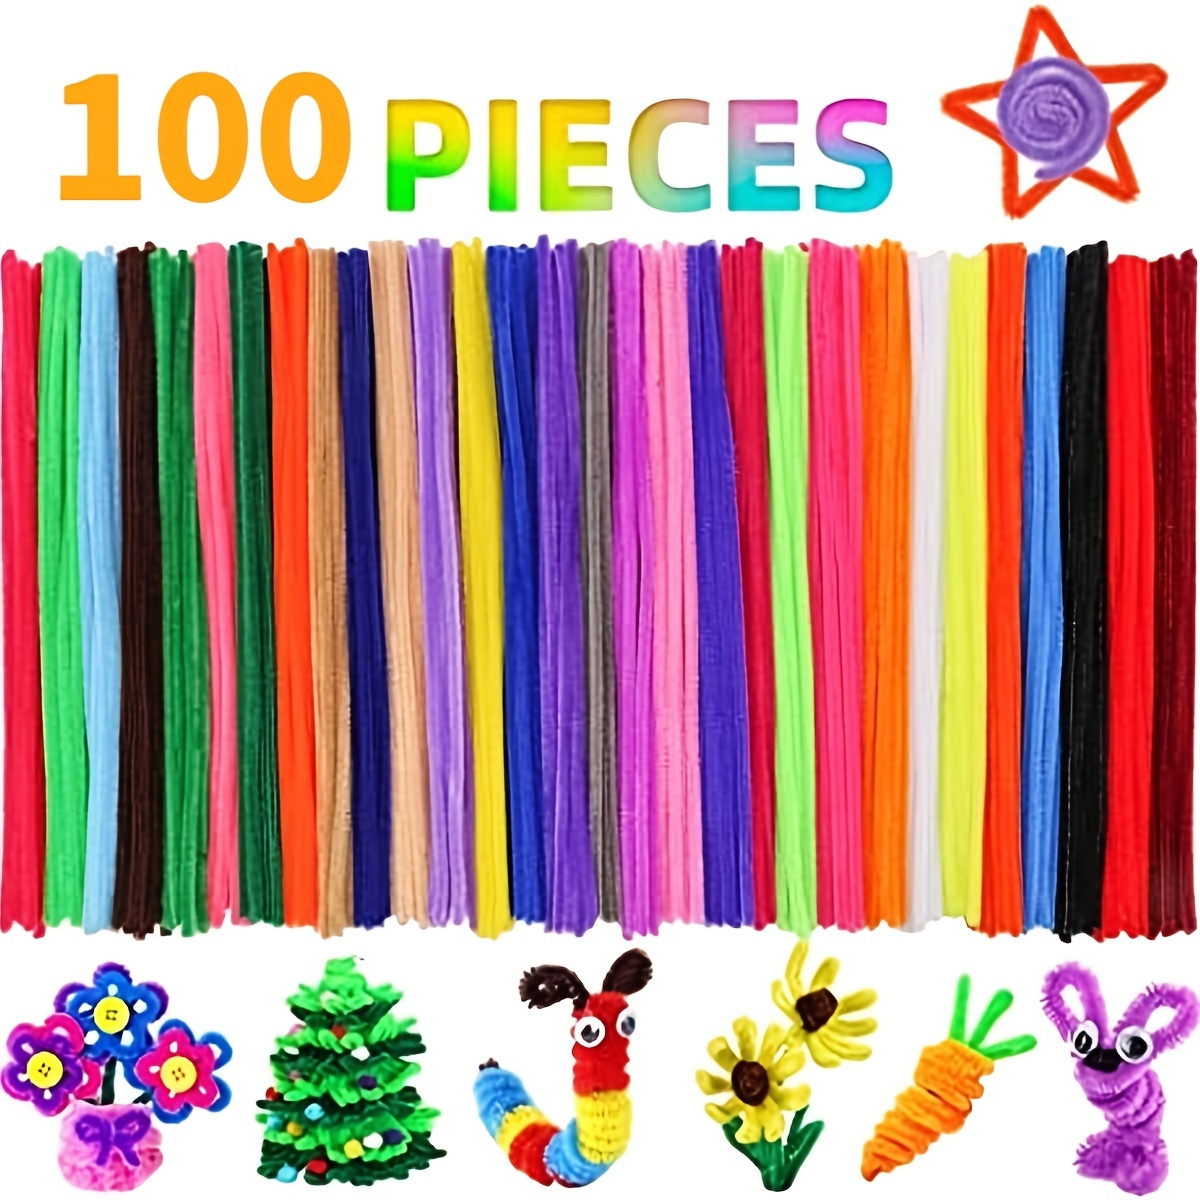 100pcs Brown Chenille Stems, Pipe Cleaners, Diy Craft Toy With Scissors